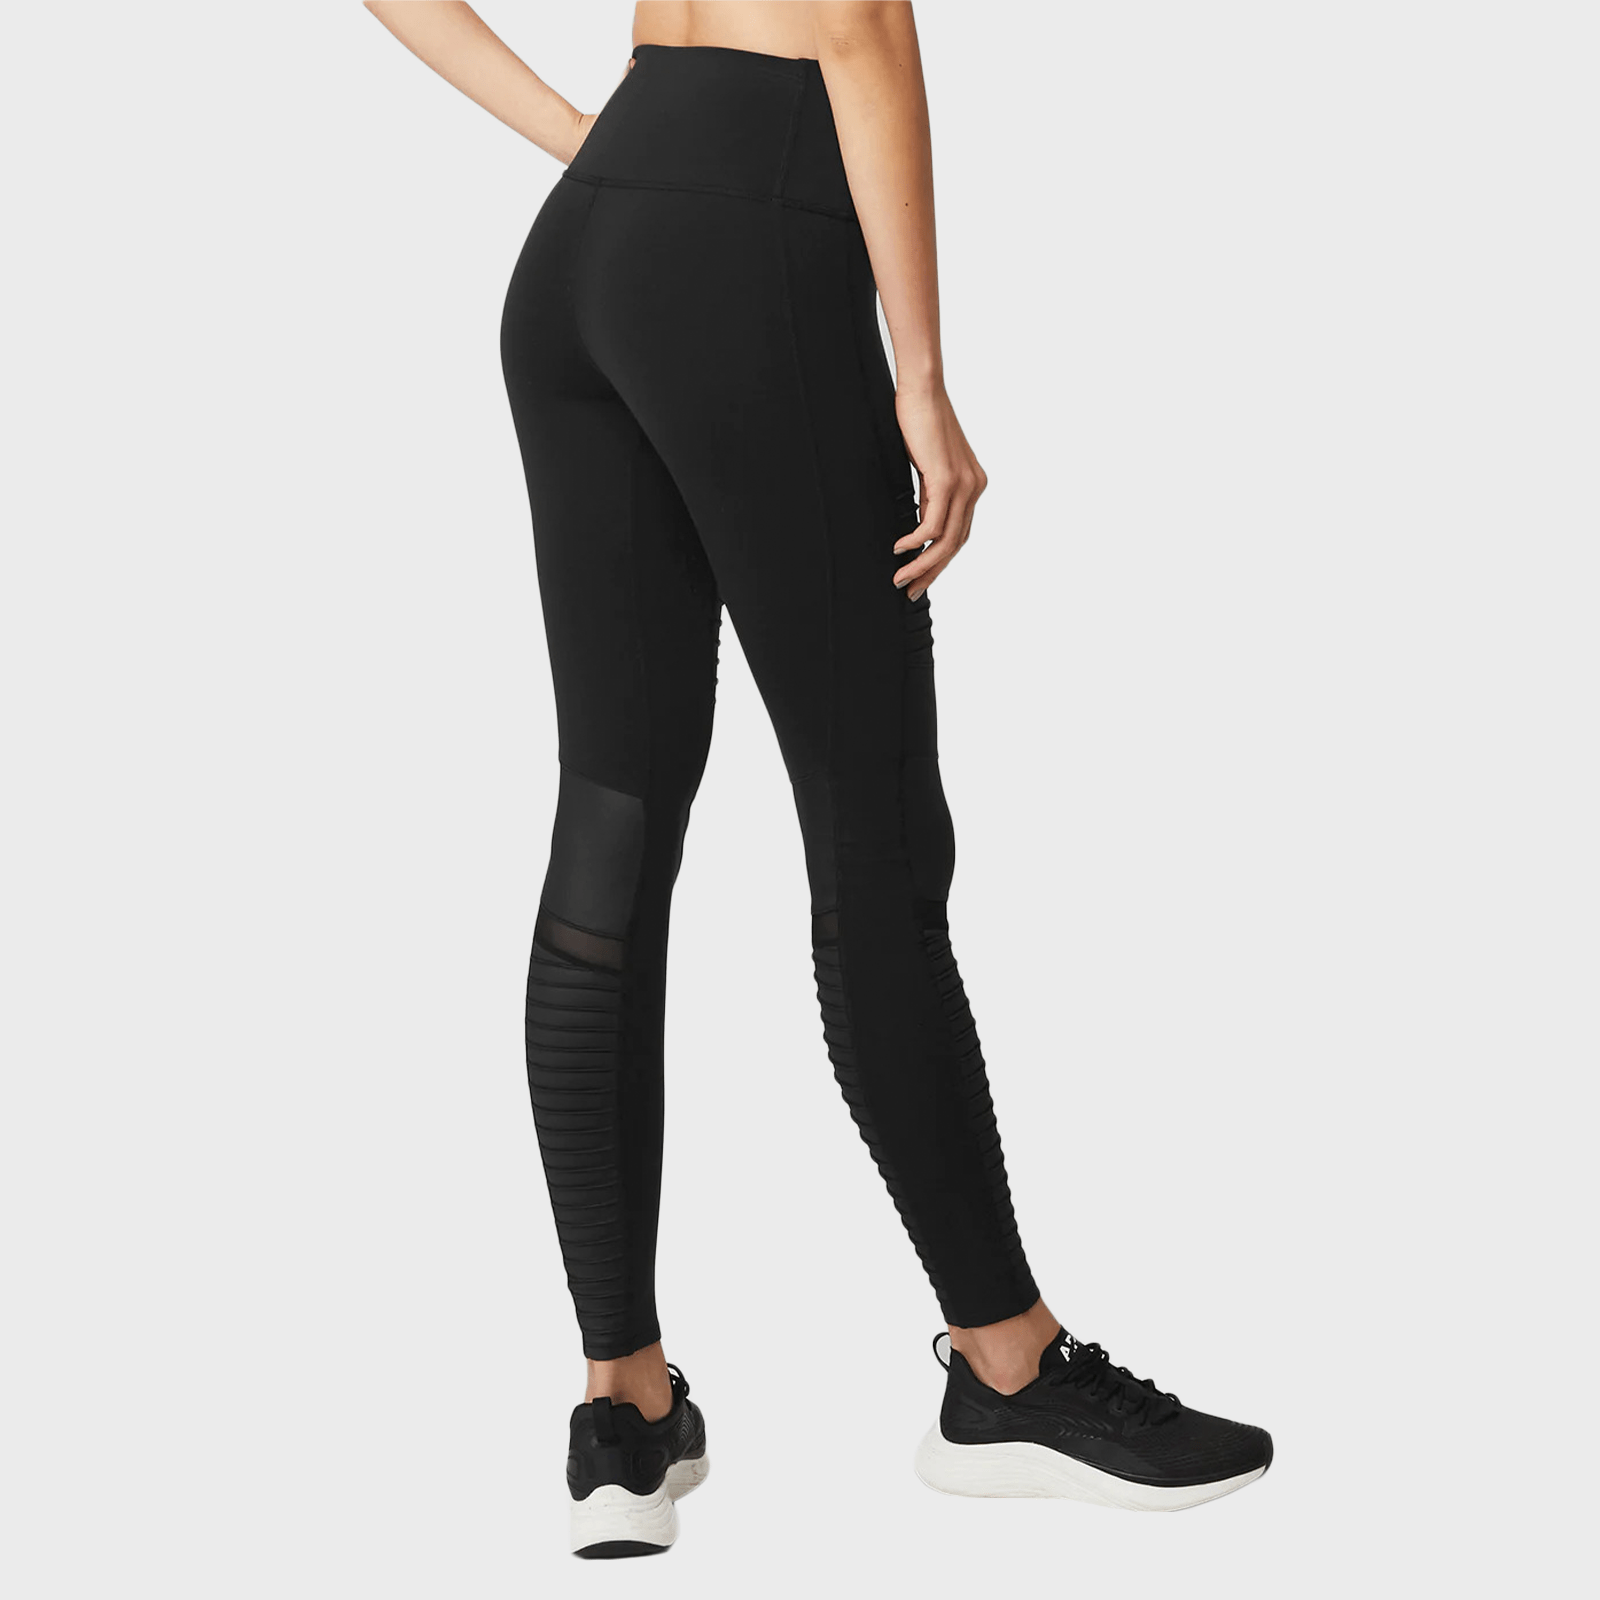 Align High Waist Stretch Tummy Booty Slimming Butt Lift Leggings with  Pockets for Fitness Workout